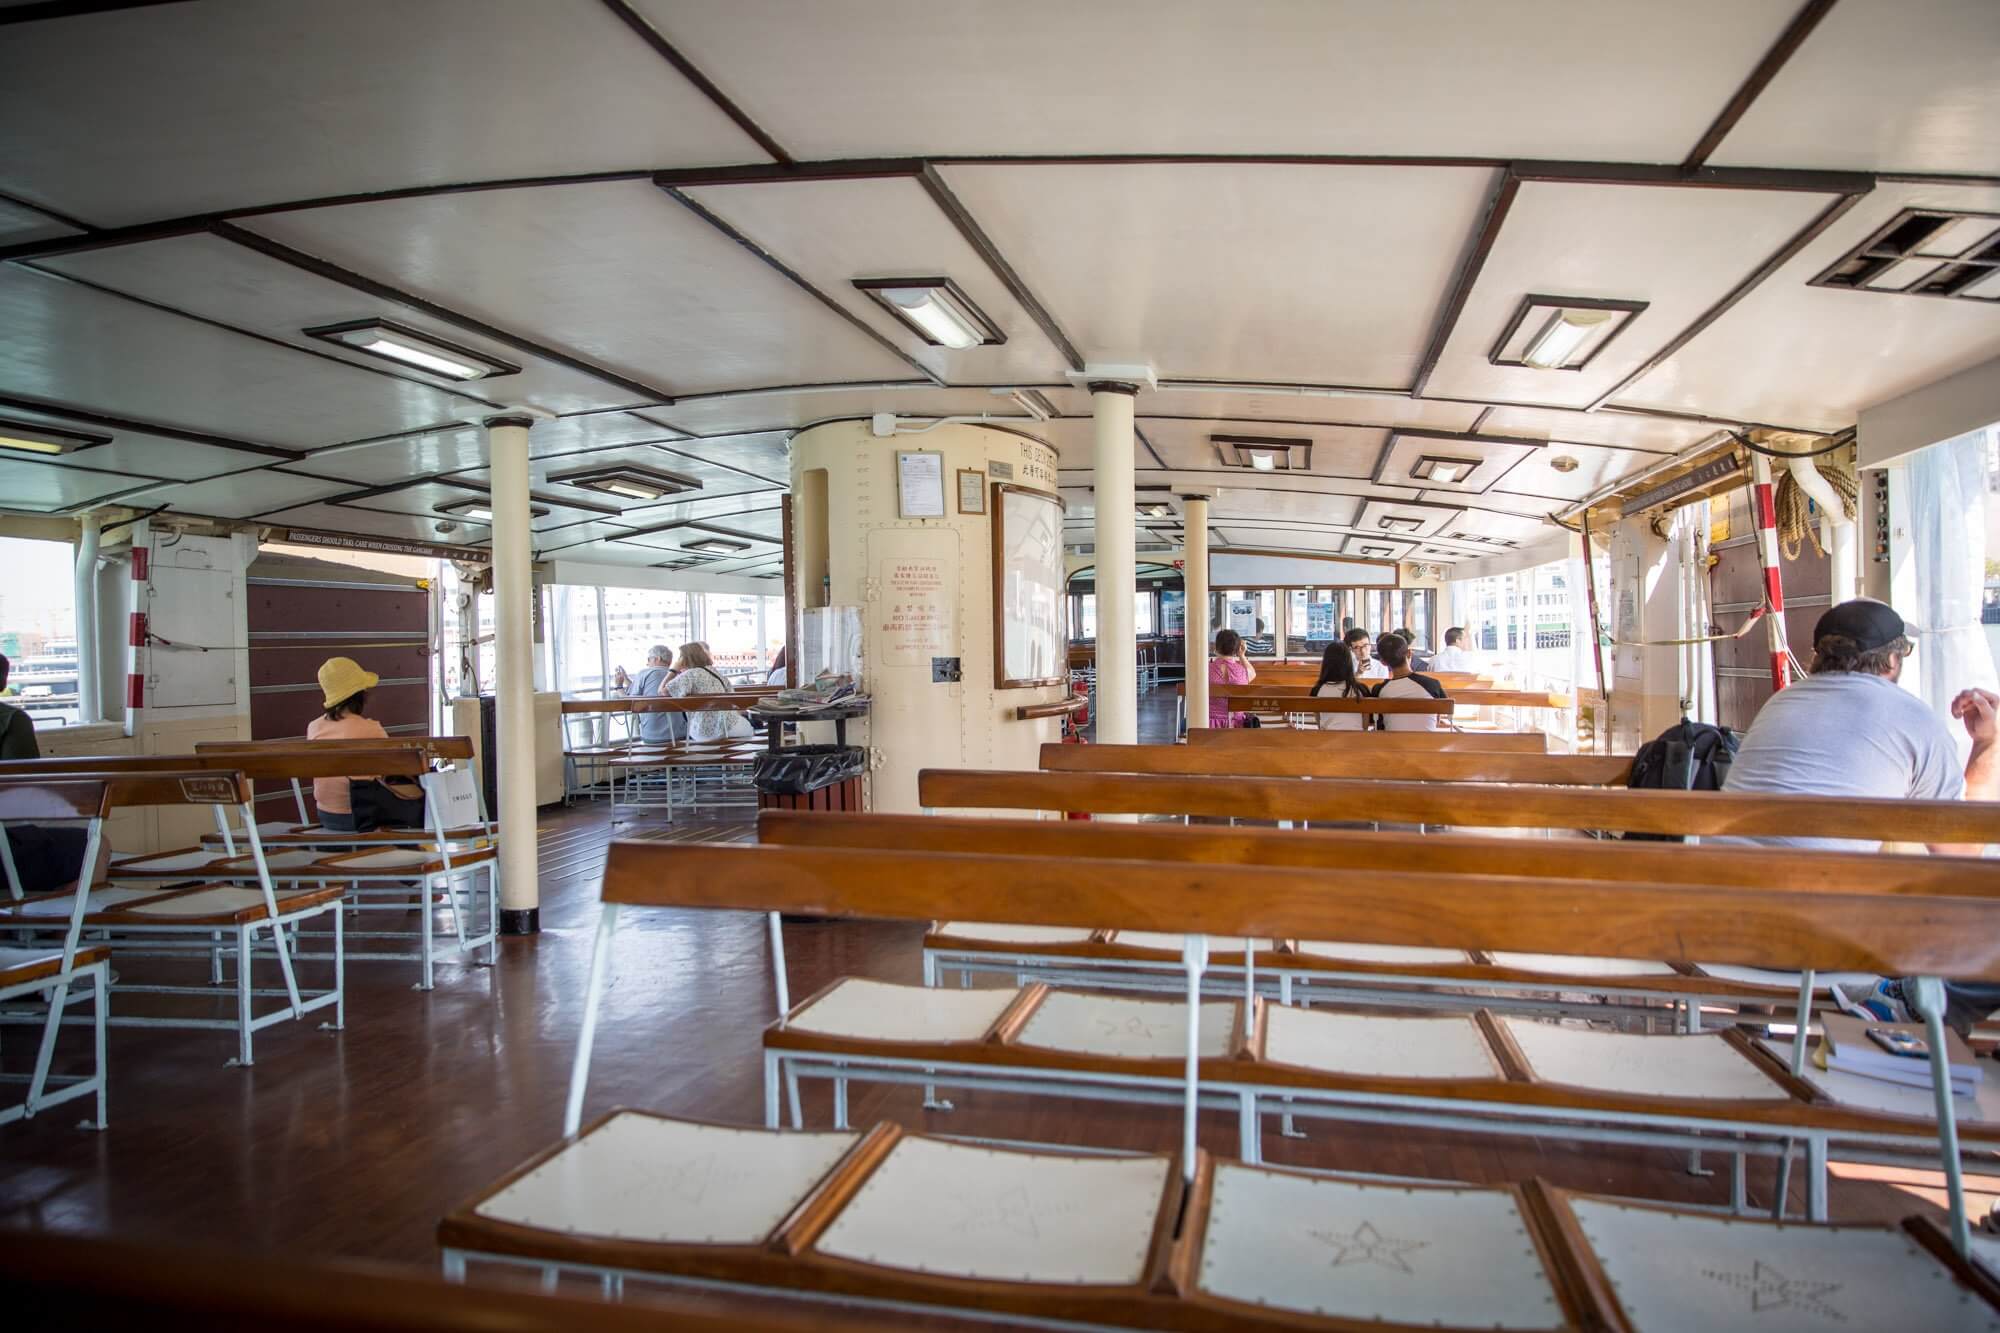 The inside of the Star Ferry upper deck